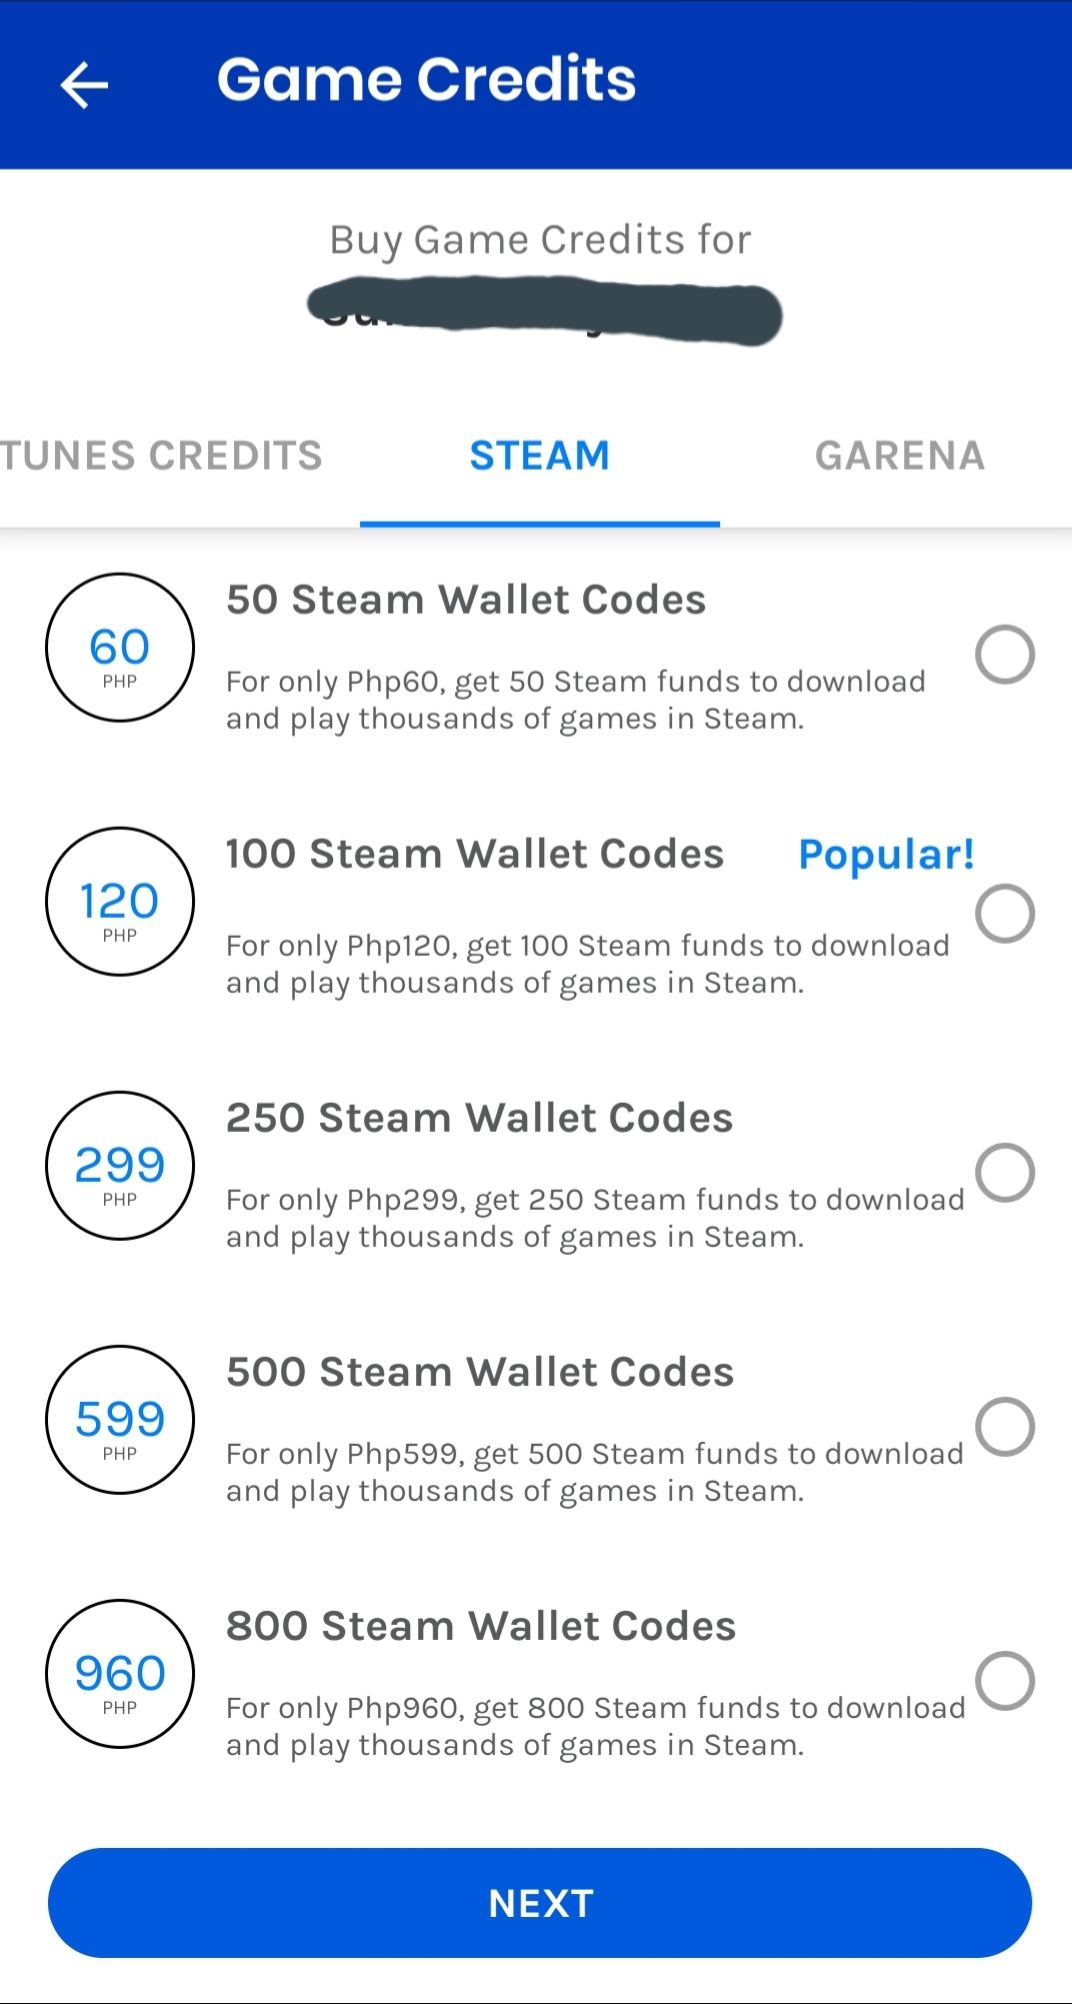 How to buy Steam games using GCash | NoypiGeeks